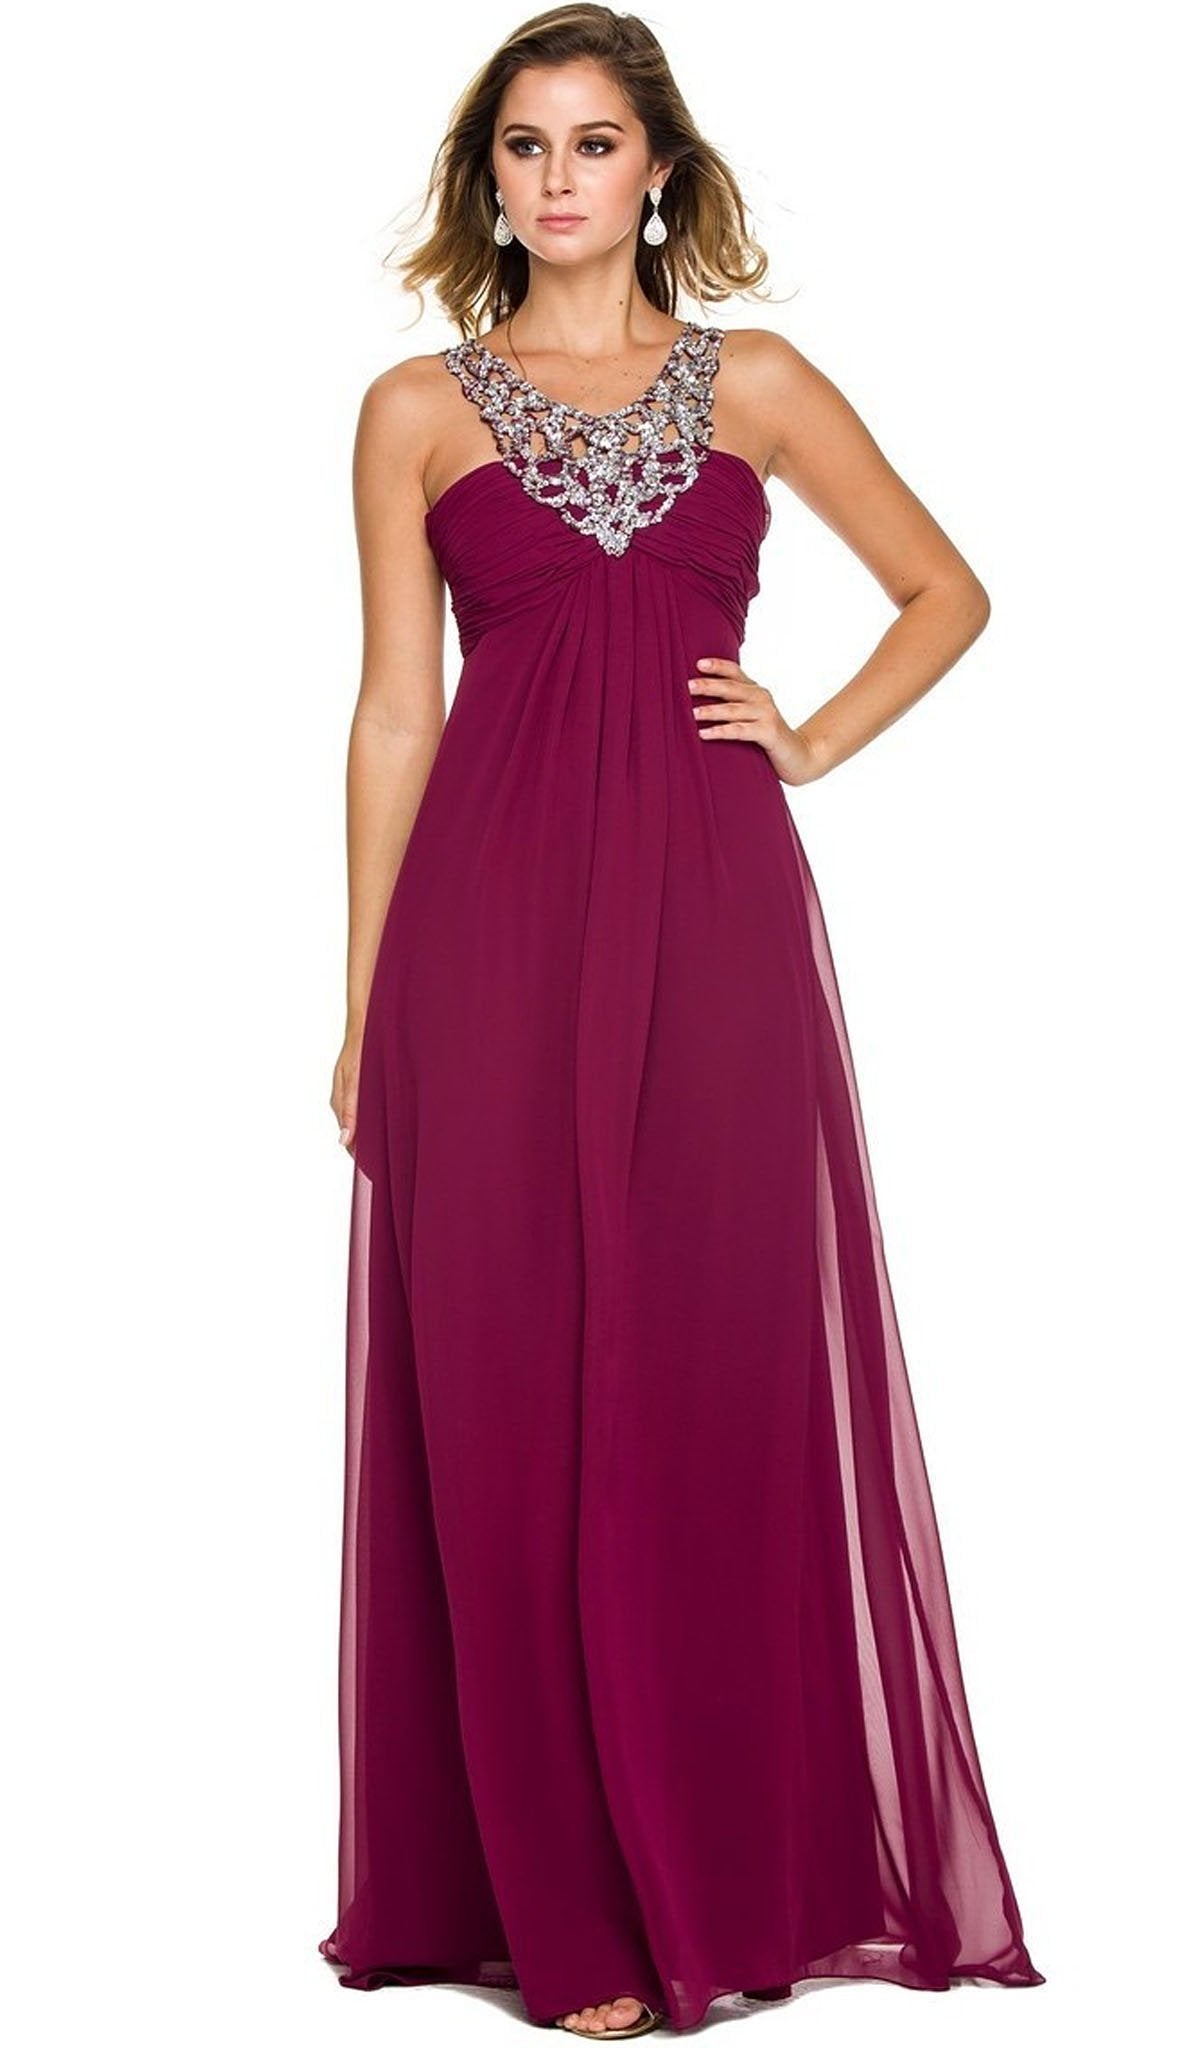 Nox Anabel - 2592 Embellished Scoop Neck Empire Waist Evening Dress Special Occasion Dress XS / Burgundy